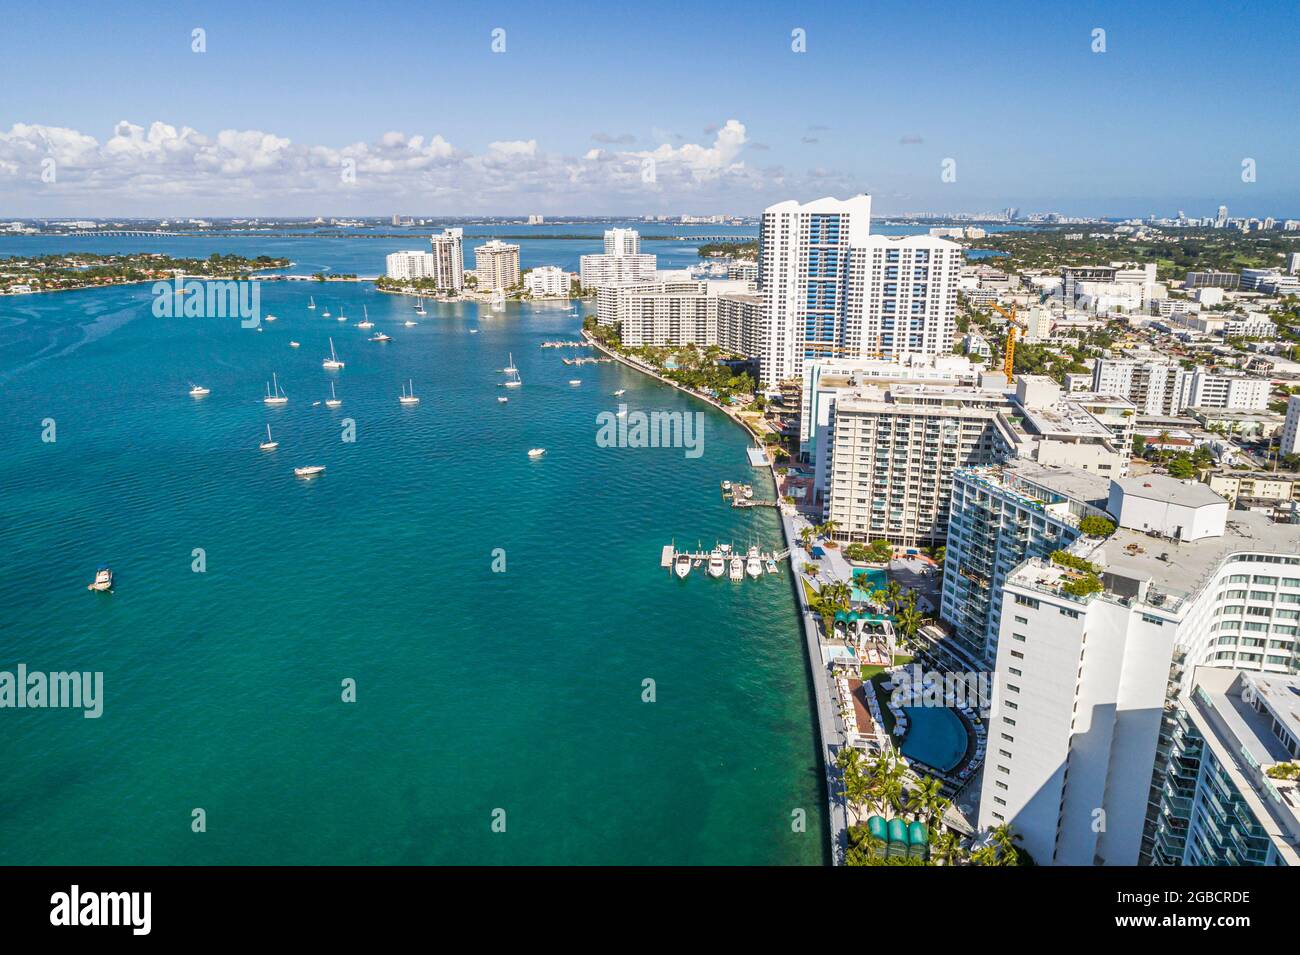 Miami Beach Florida,Biscayne Bay water,aerial overhead view,high rise towers condominium residential buildings waterfront,Mondrian South Beach hotels Stock Photo